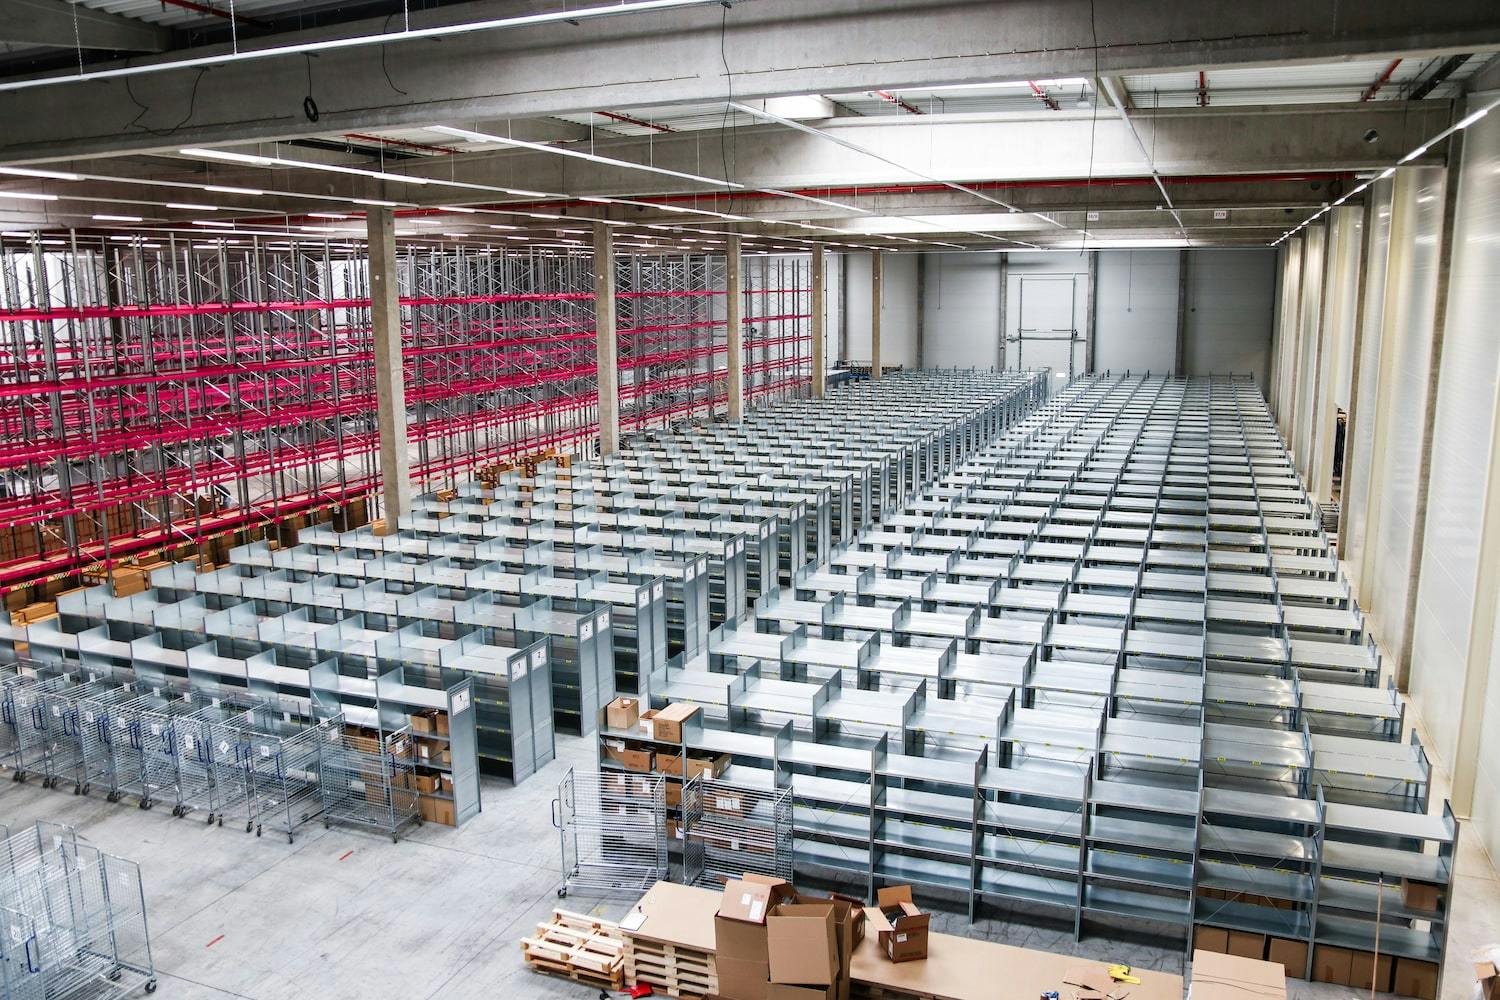 Skladon has grown by another 6,000 sqm and shows that fulfillment is on the move